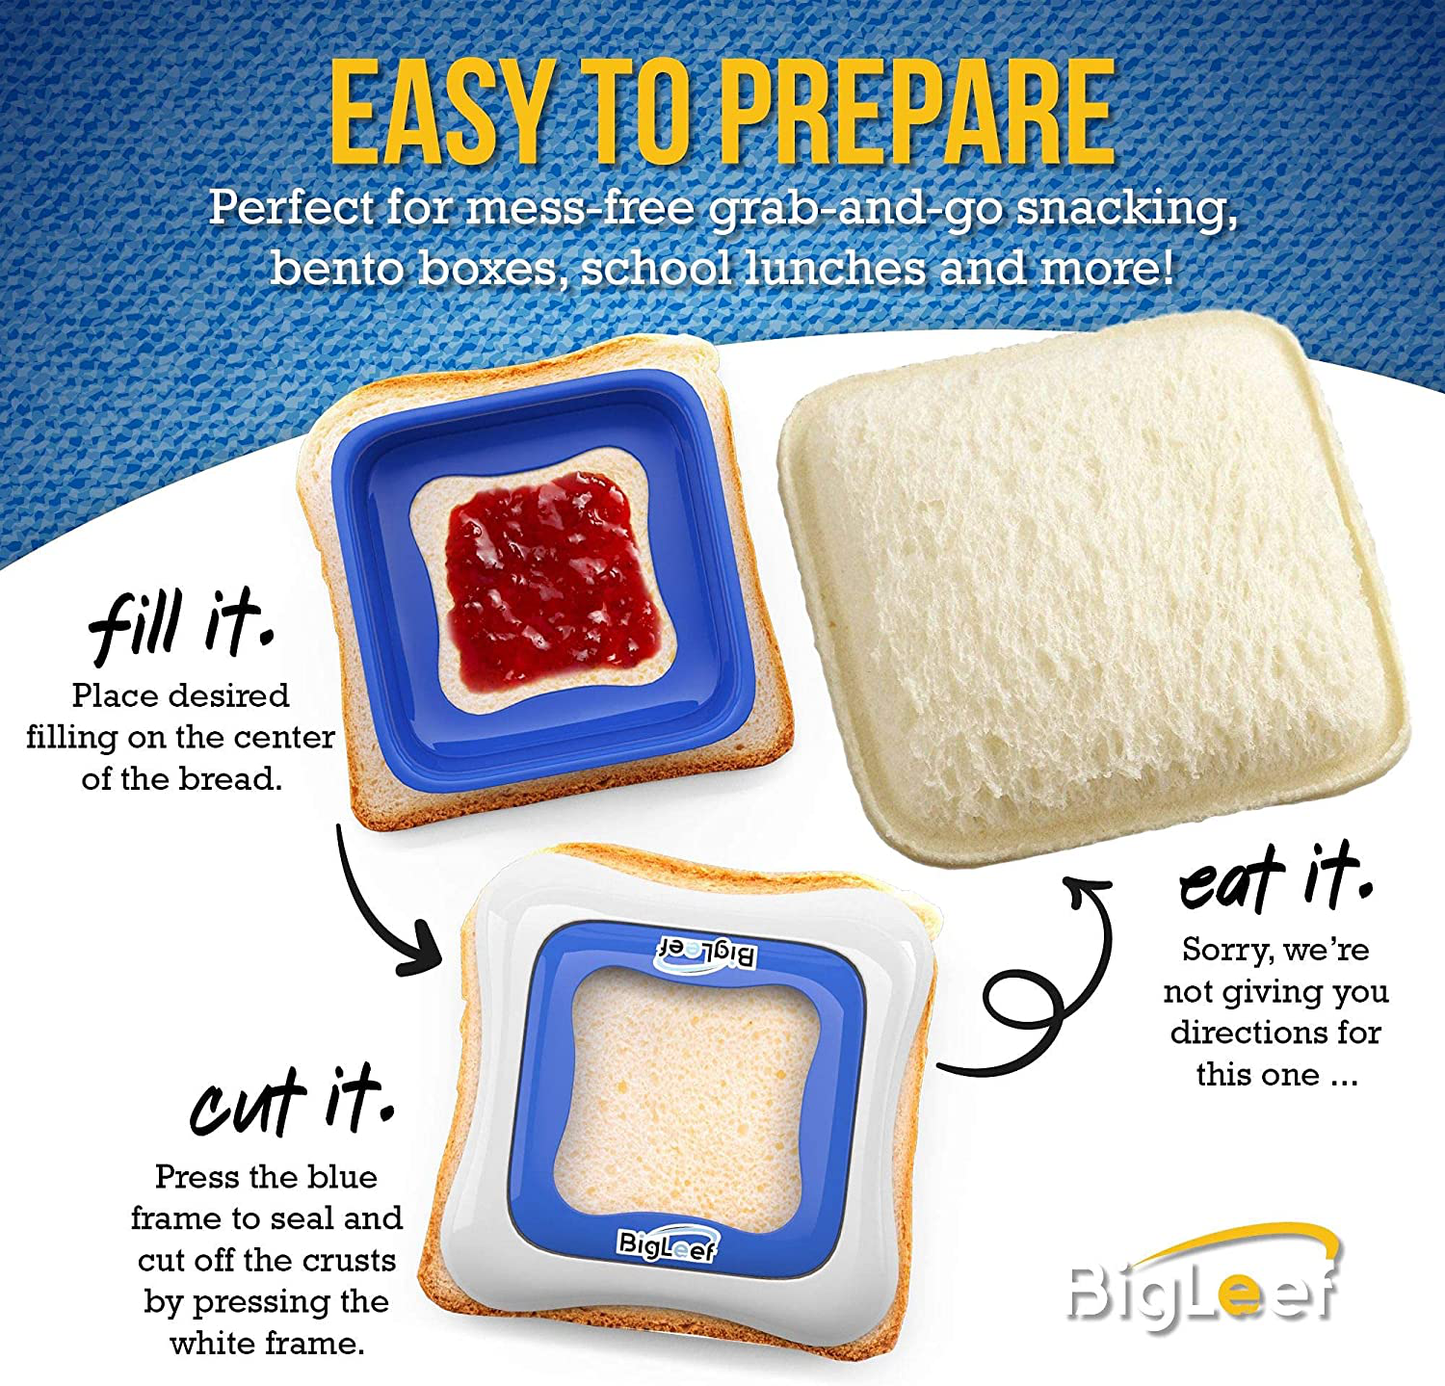 Sandwich Cutter, Sealer and Decruster for Kids - Remove Bread Crust, Make DIY Pocket Sandwiches - Non Toxic, BPA Free, Food Grade Mold - Durable, Portable, Easy to Use and Dishwasher Safe by BigLeef